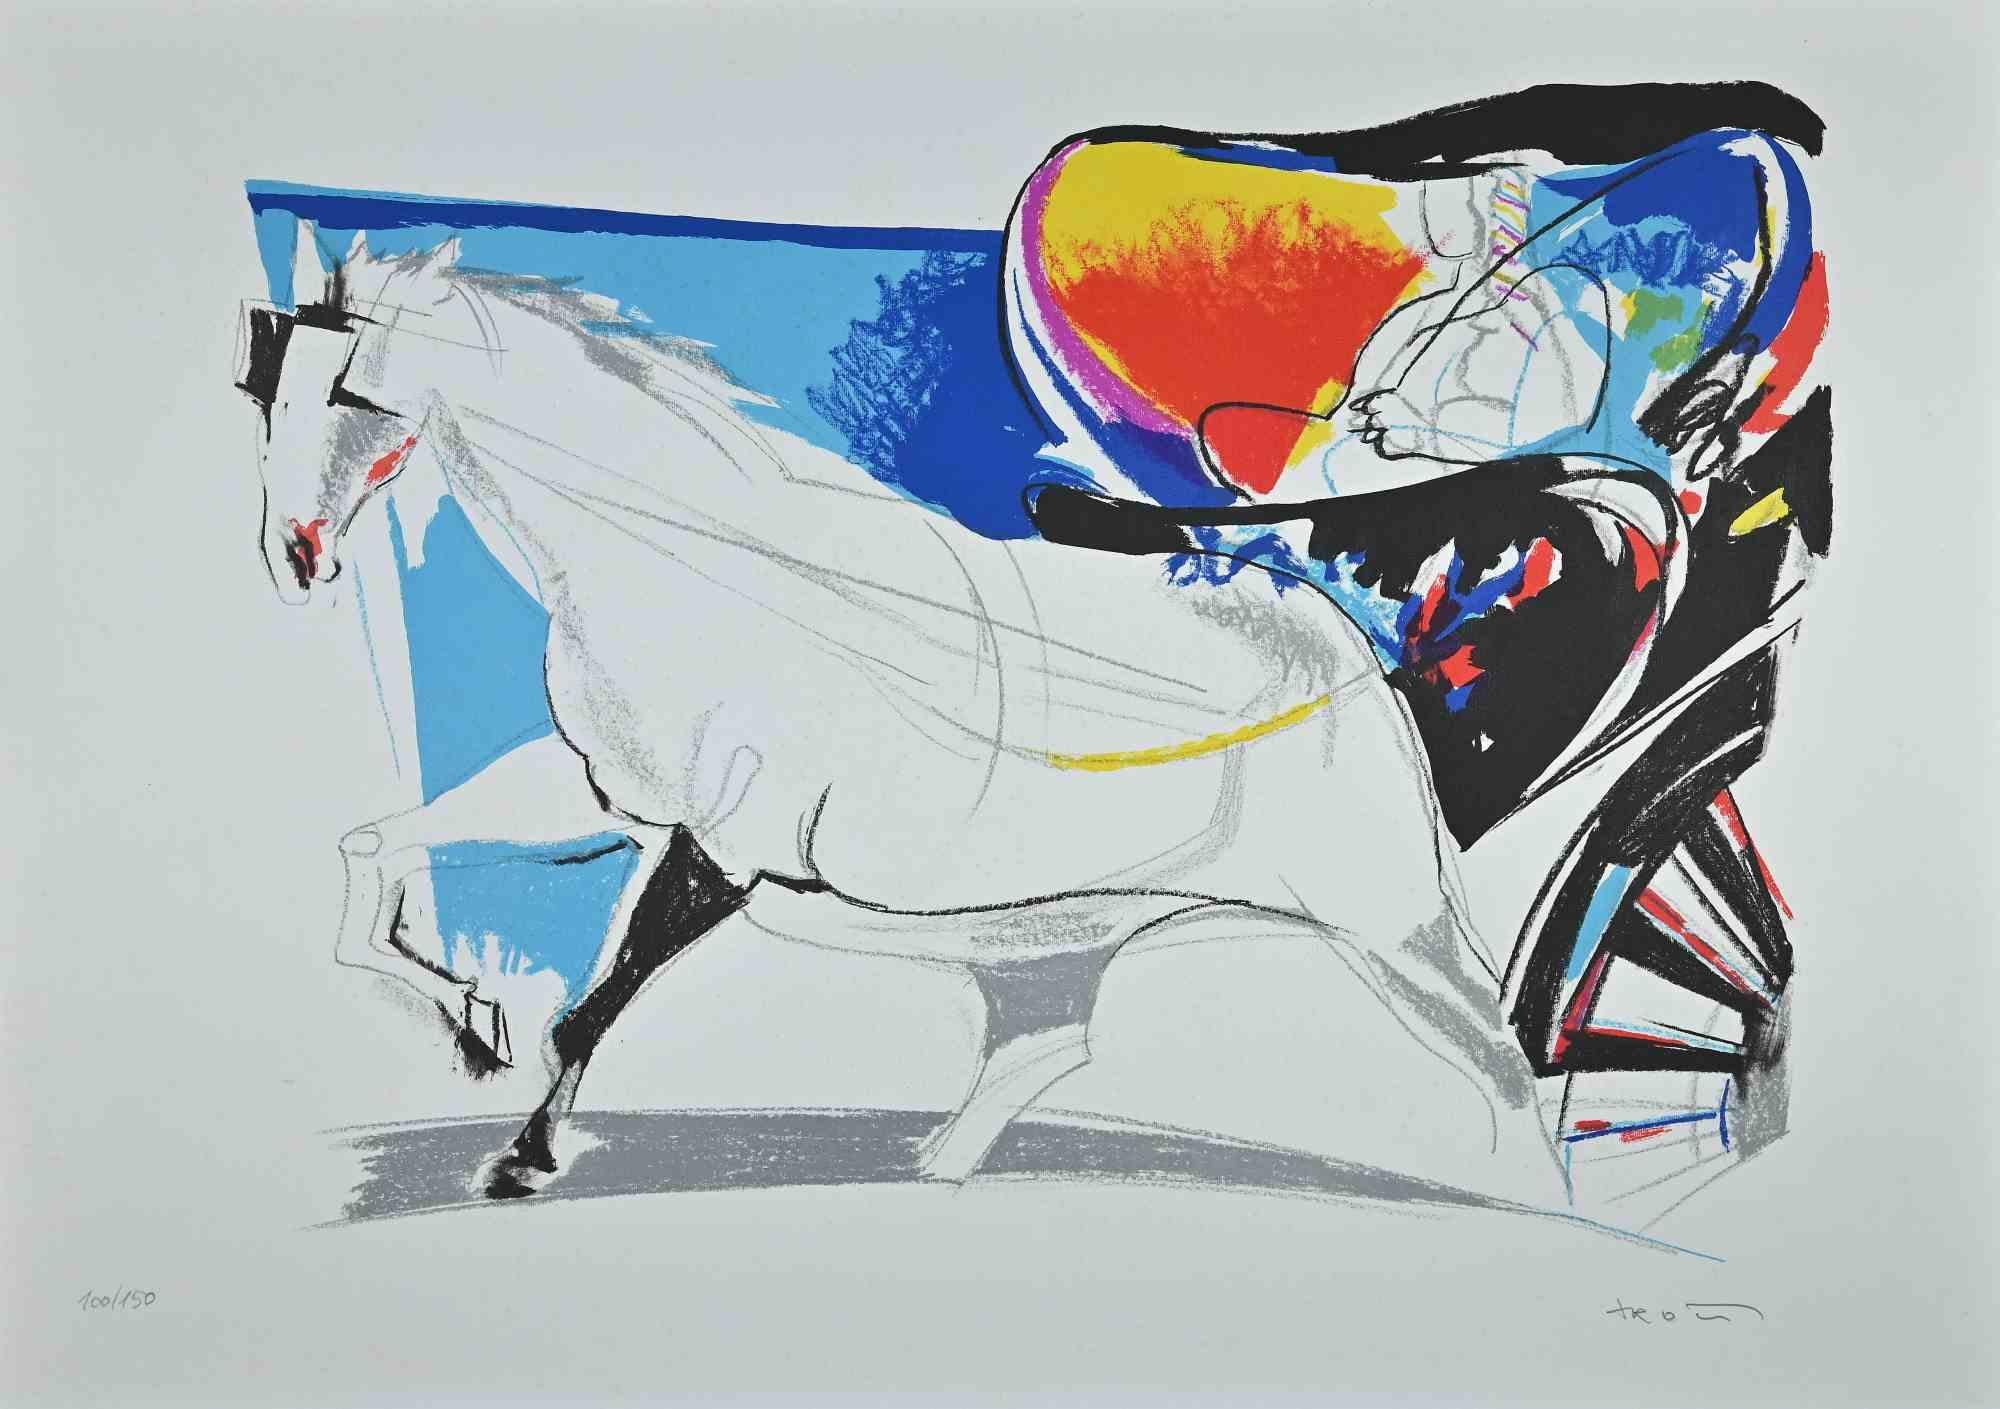 Risciò is an original colored lithograph on Fabriano Cotton watermarked paper realized by Sandro Trotti  in the 1970s and published by EuroMuseum Editore, Ancona.

Representing a barrow exalted by a wonderful contrast of colors, this original print